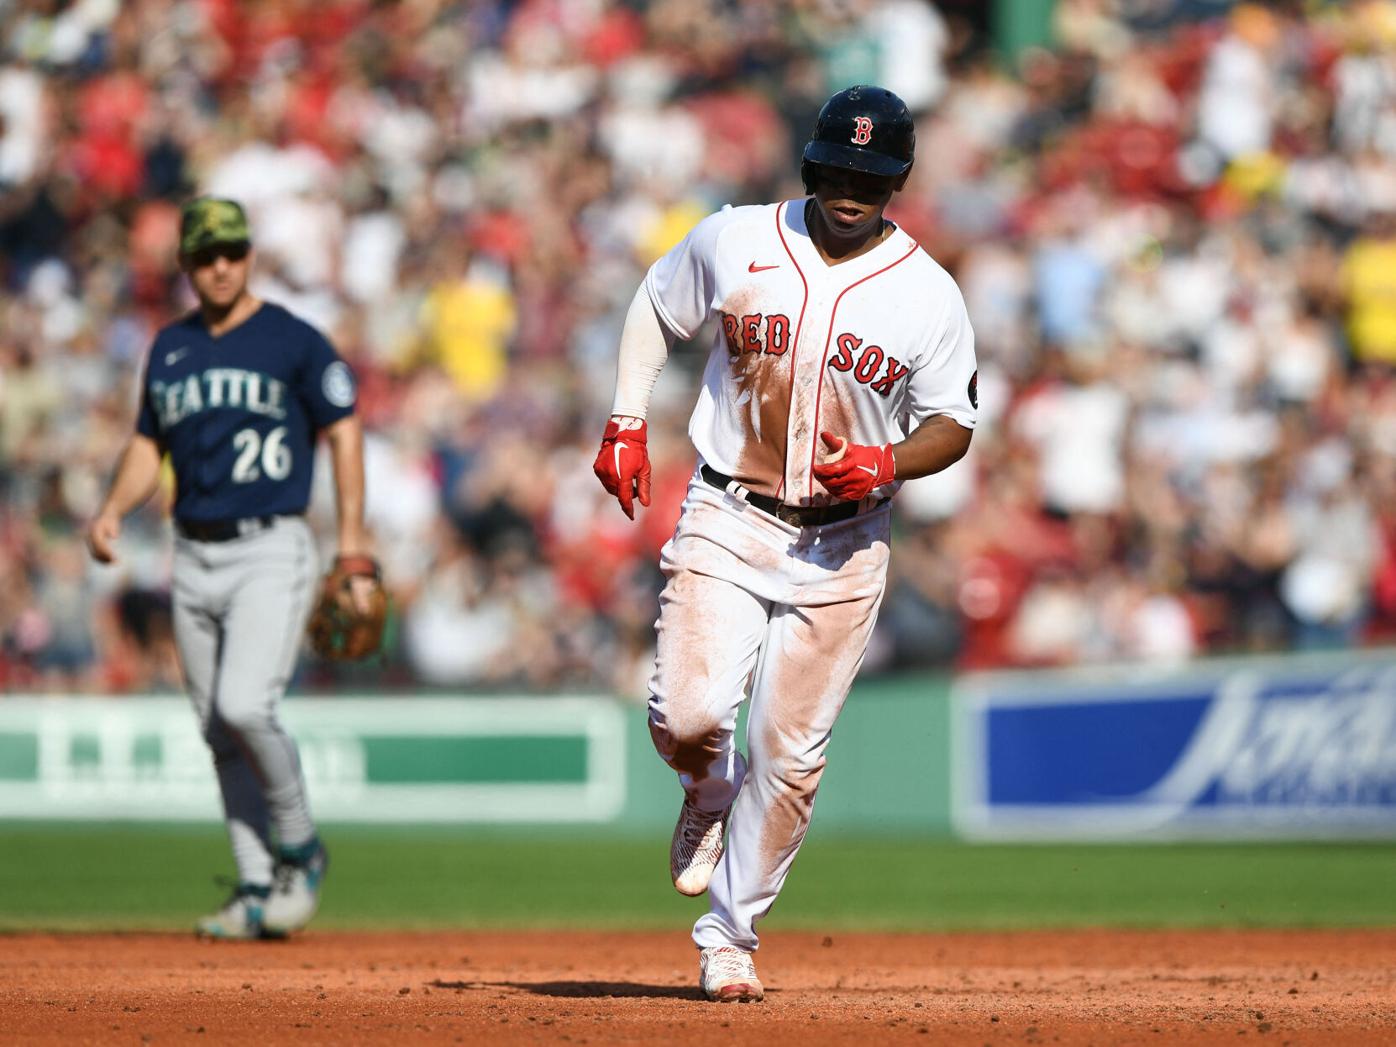 2013 Red Sox to reunite at Fenway, 10 years after Boston Marathon bombings  connected the team to the city like never before - The Boston Globe